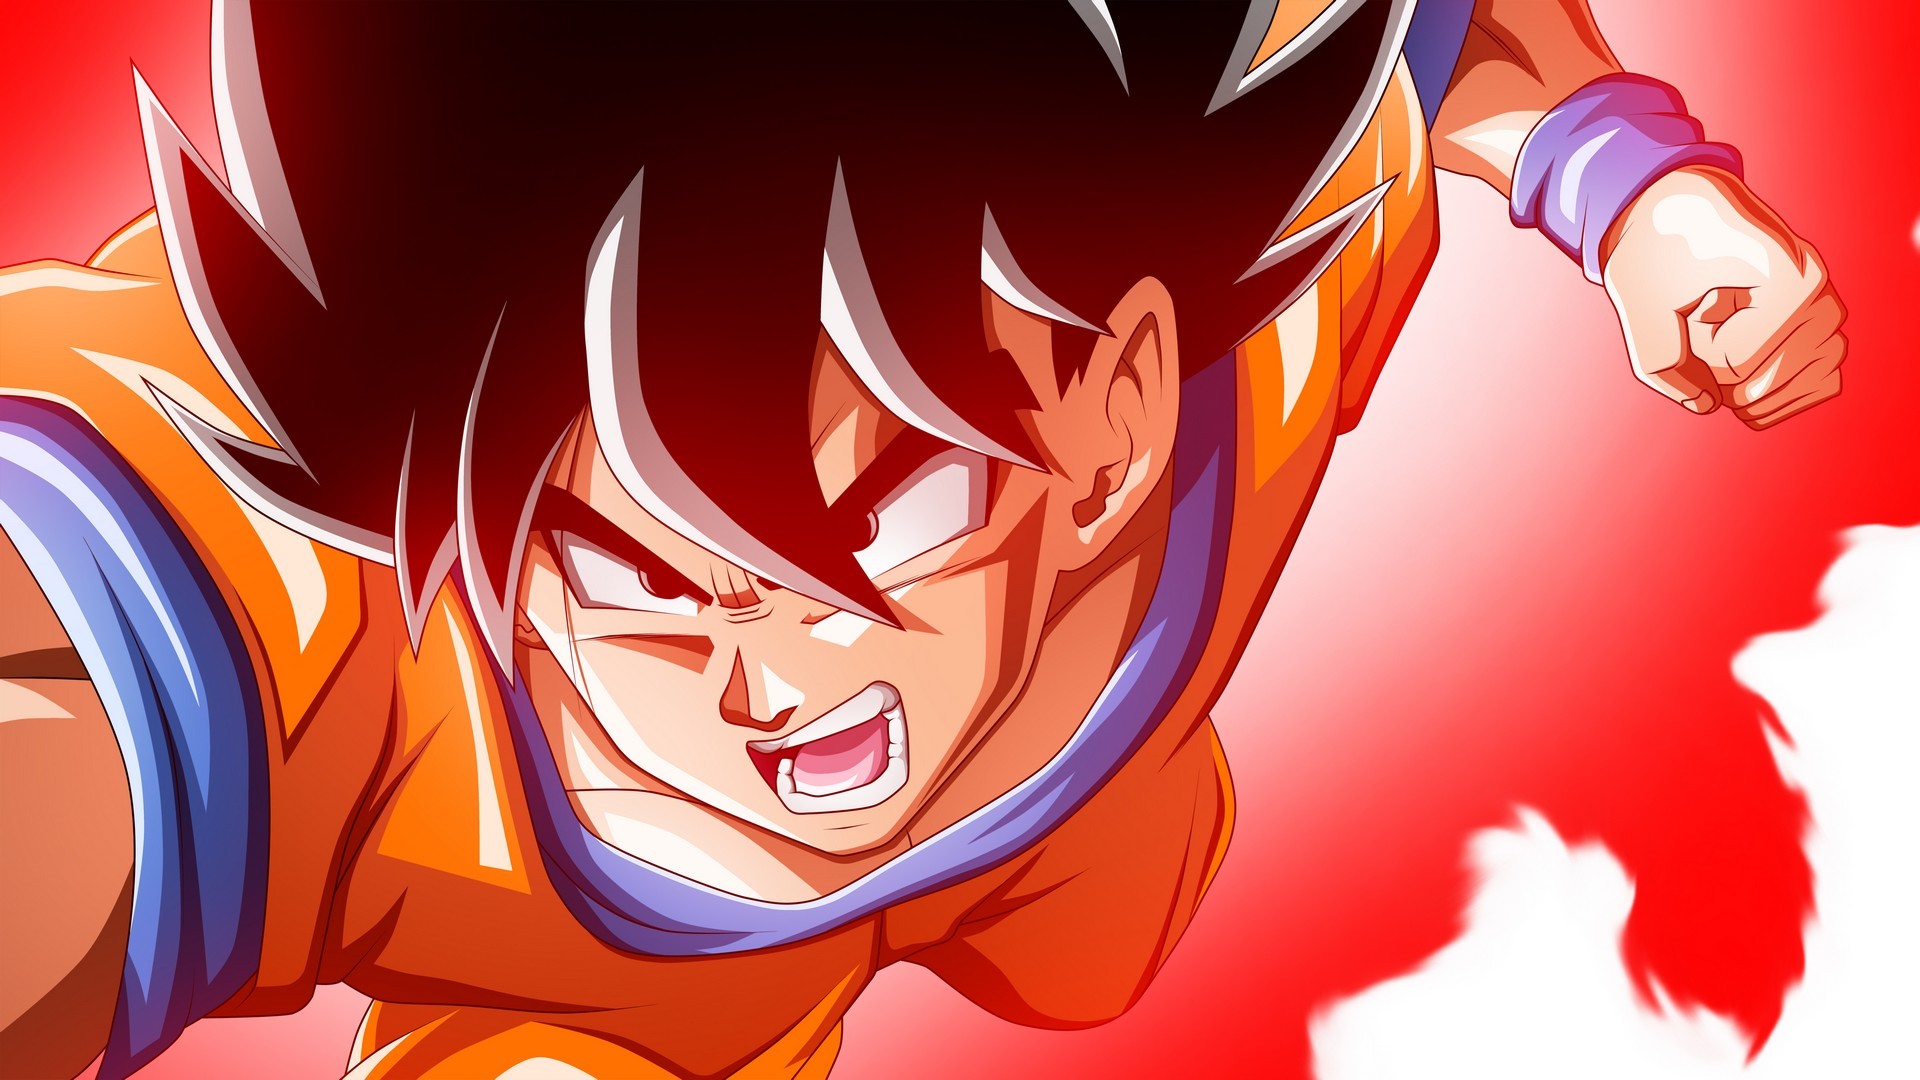 Goku Imagenes Desktop Backgrounds with image resolution 1920x1080 pixel. You can make this wallpaper for your Desktop Computer Backgrounds, Mac Wallpapers, Android Lock screen or iPhone Screensavers